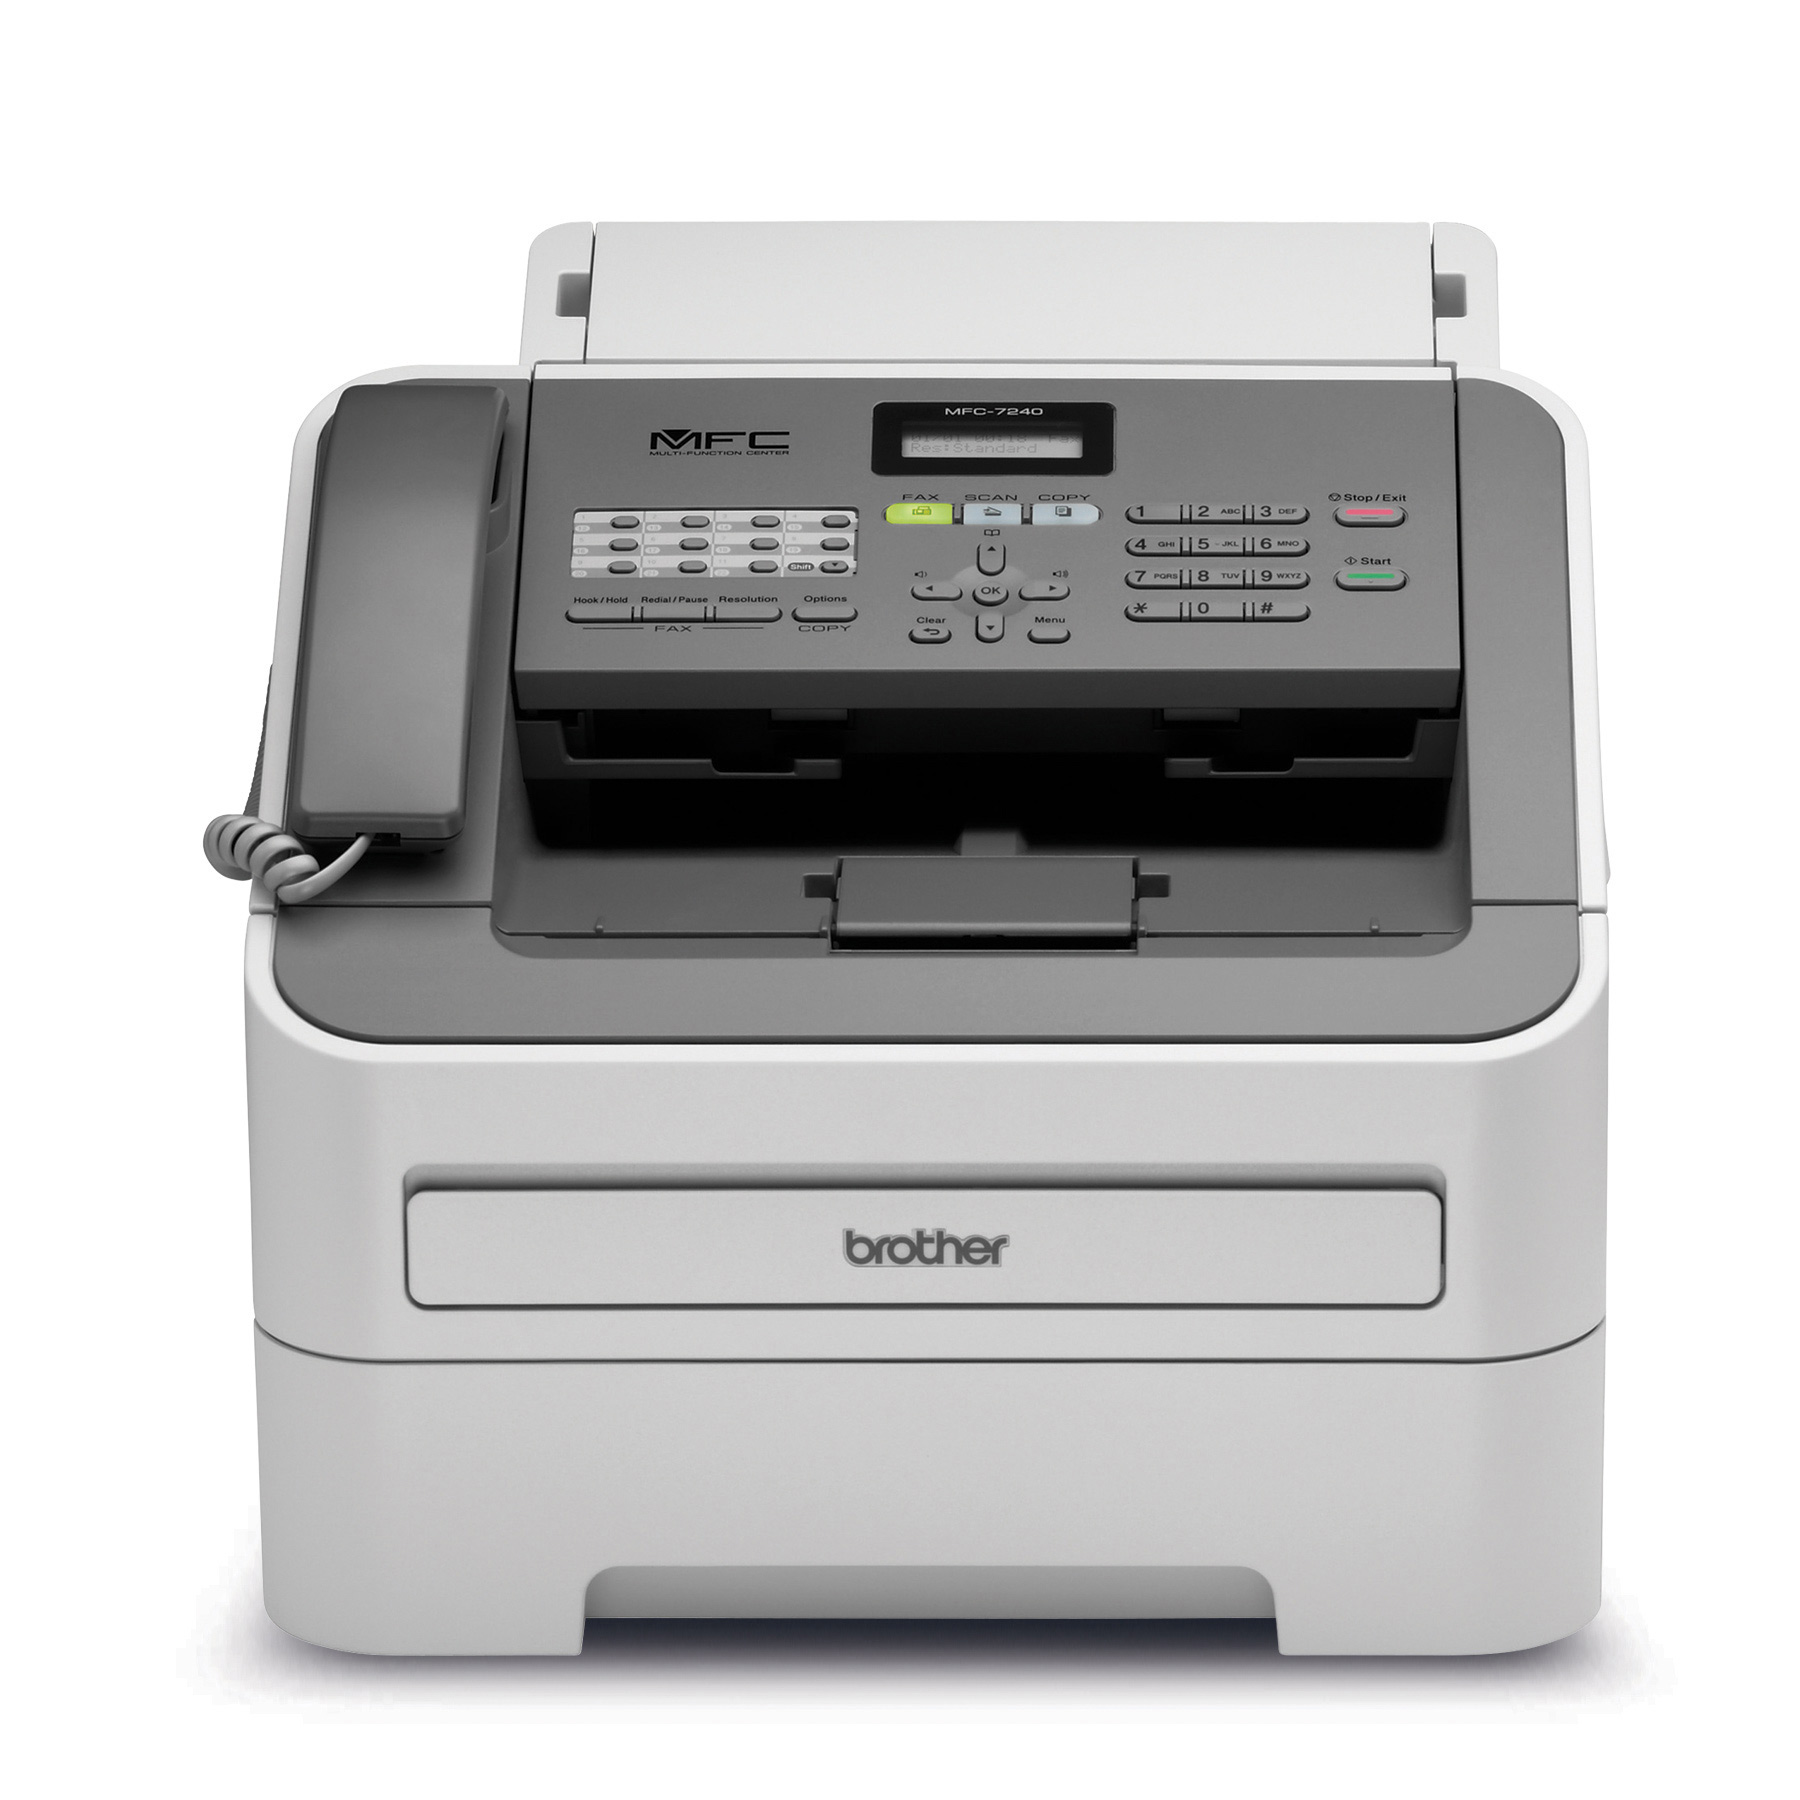 Image of Brother MFC-7240 Compact Monochrome Laser Multifunction